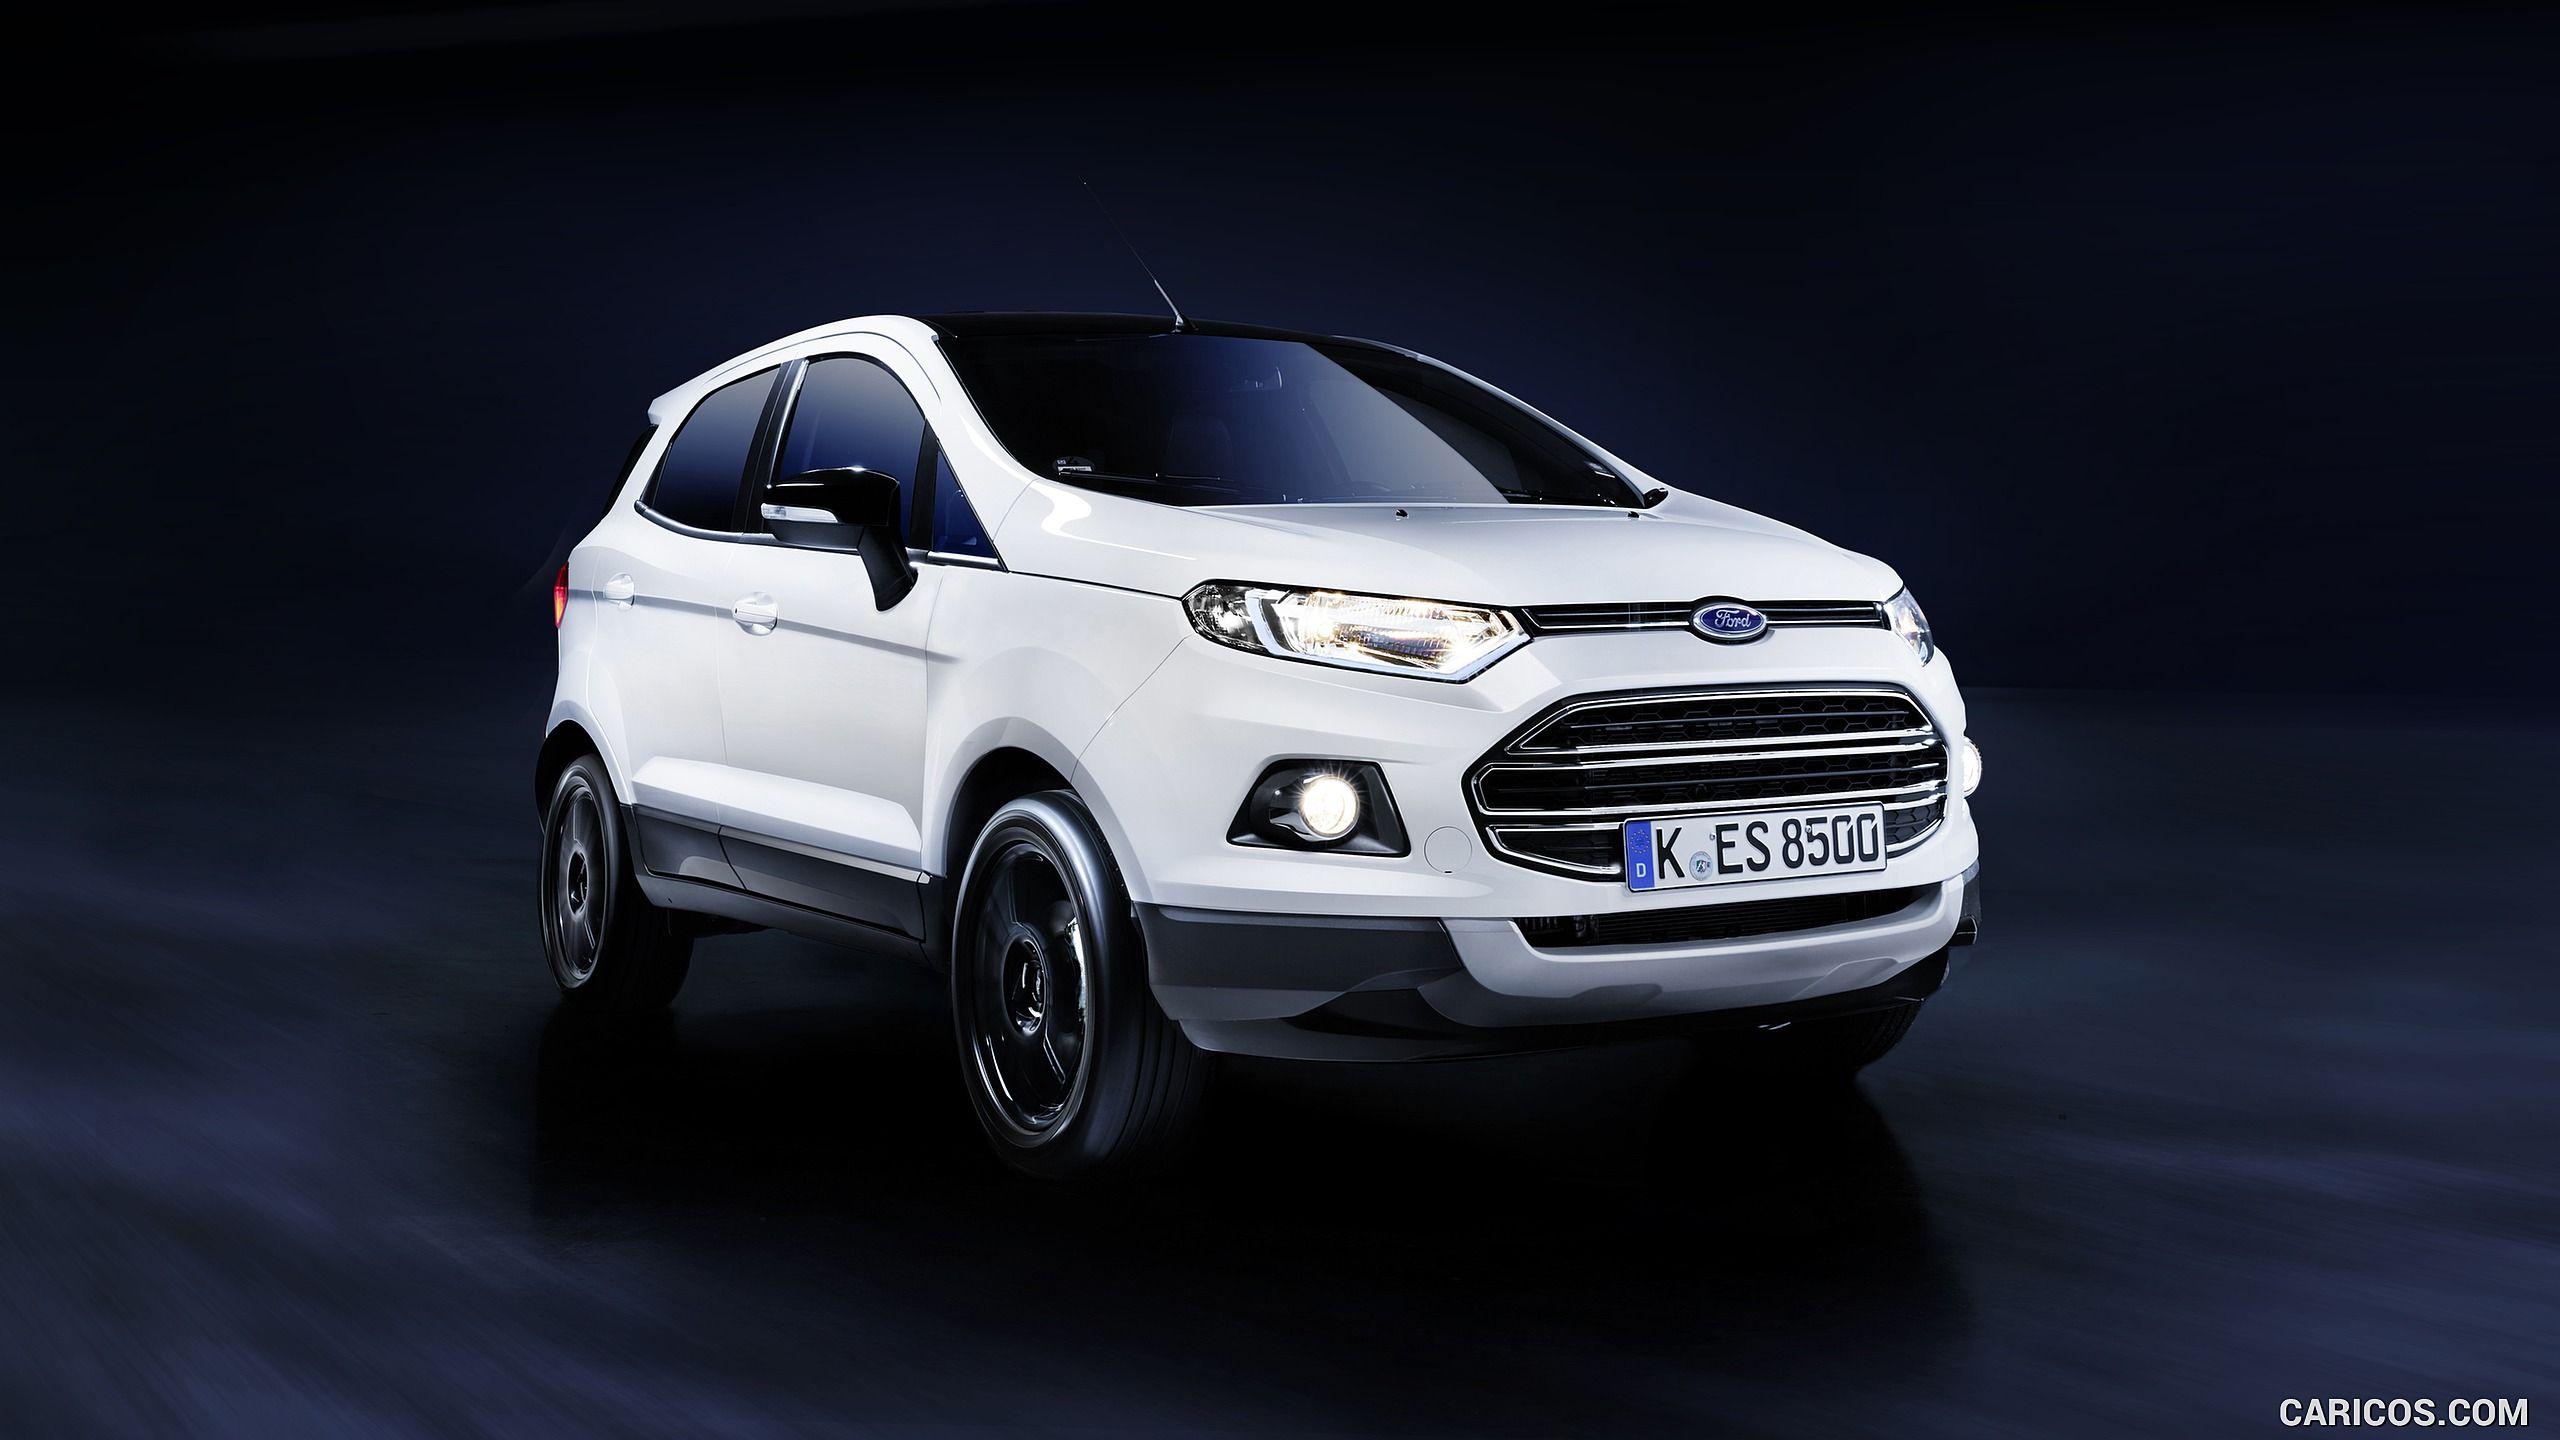 Ford EcoSport Wallpaper. Things to fill the Garage with. Ford